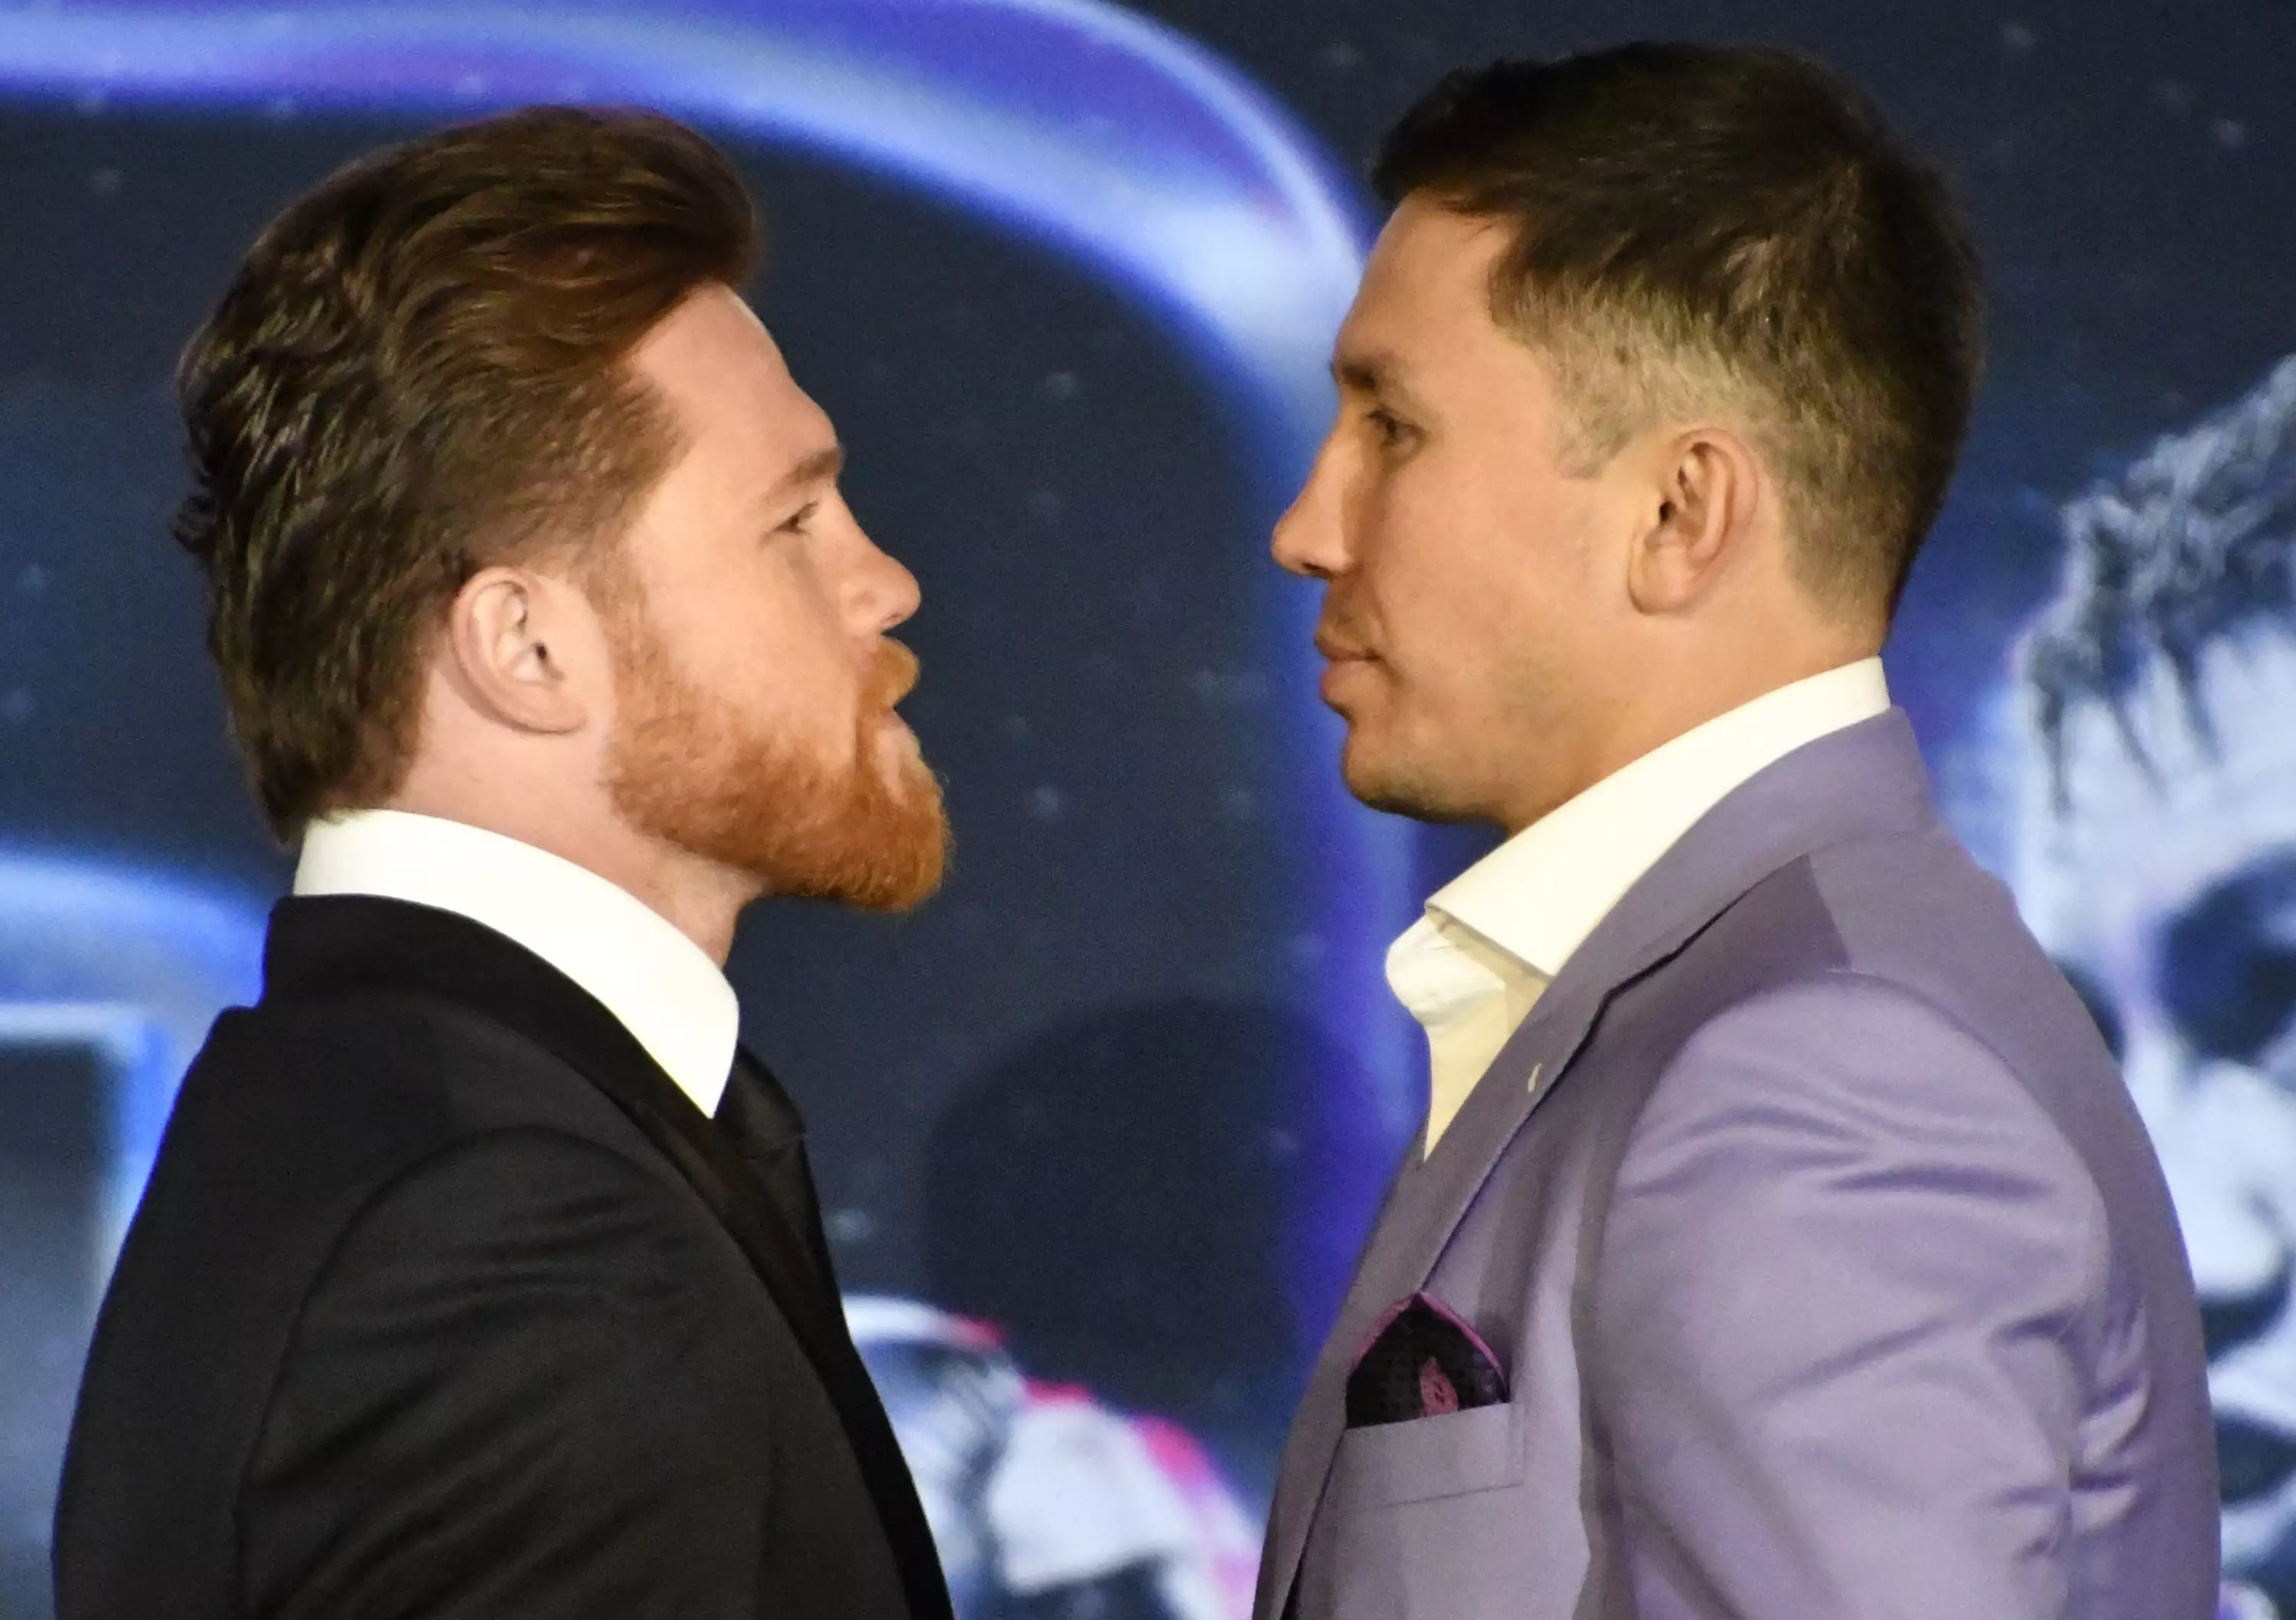 'Canelo' and 'GGG' face-off. Image: PA